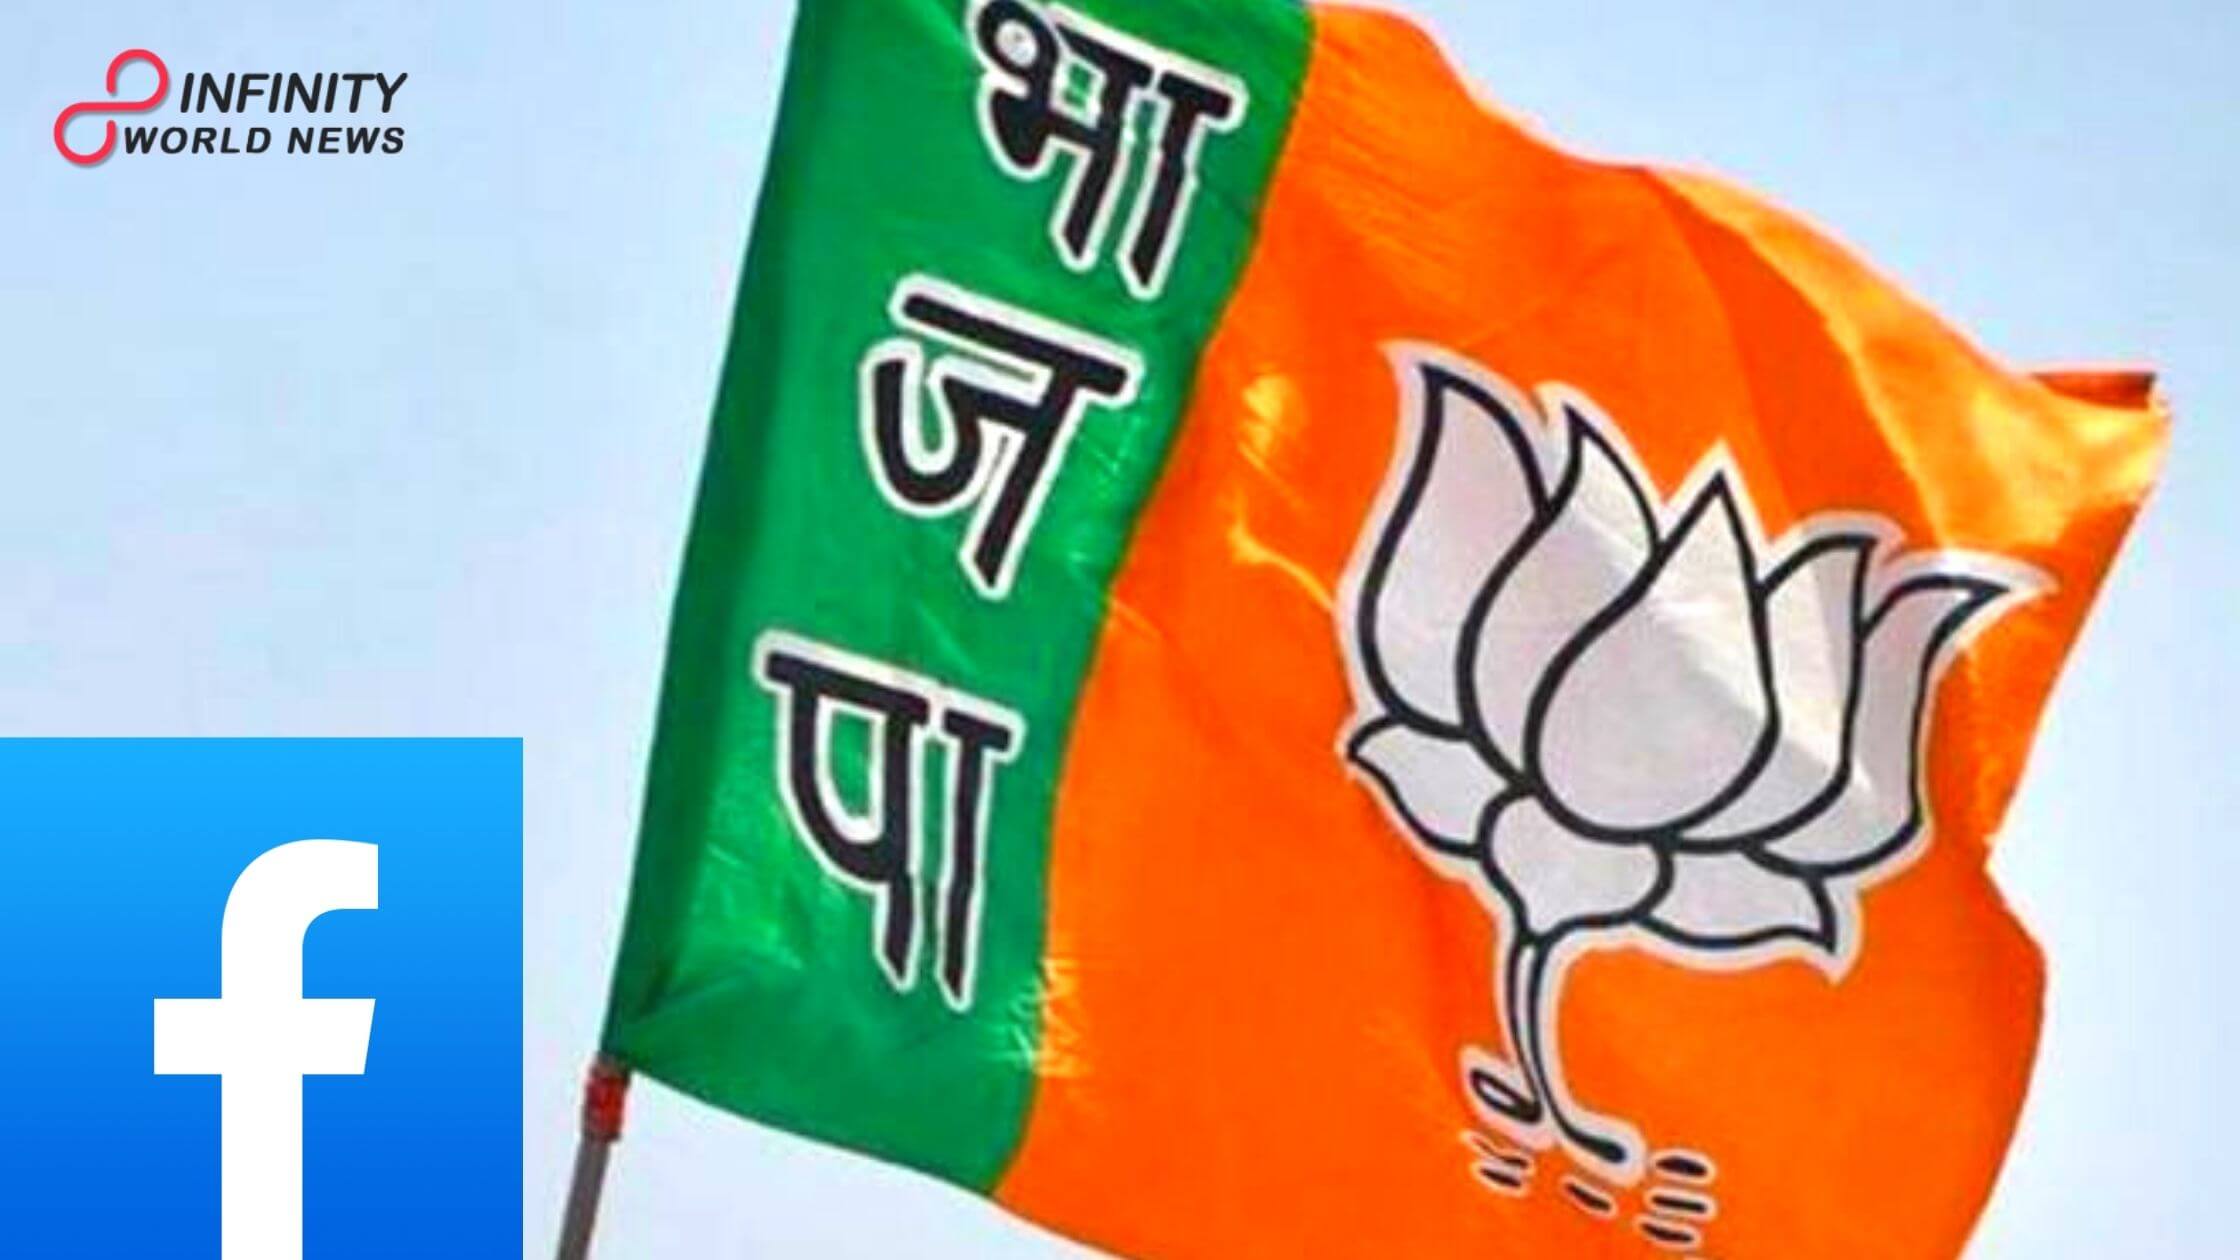 BJP tops political promotion spend on Facebook India